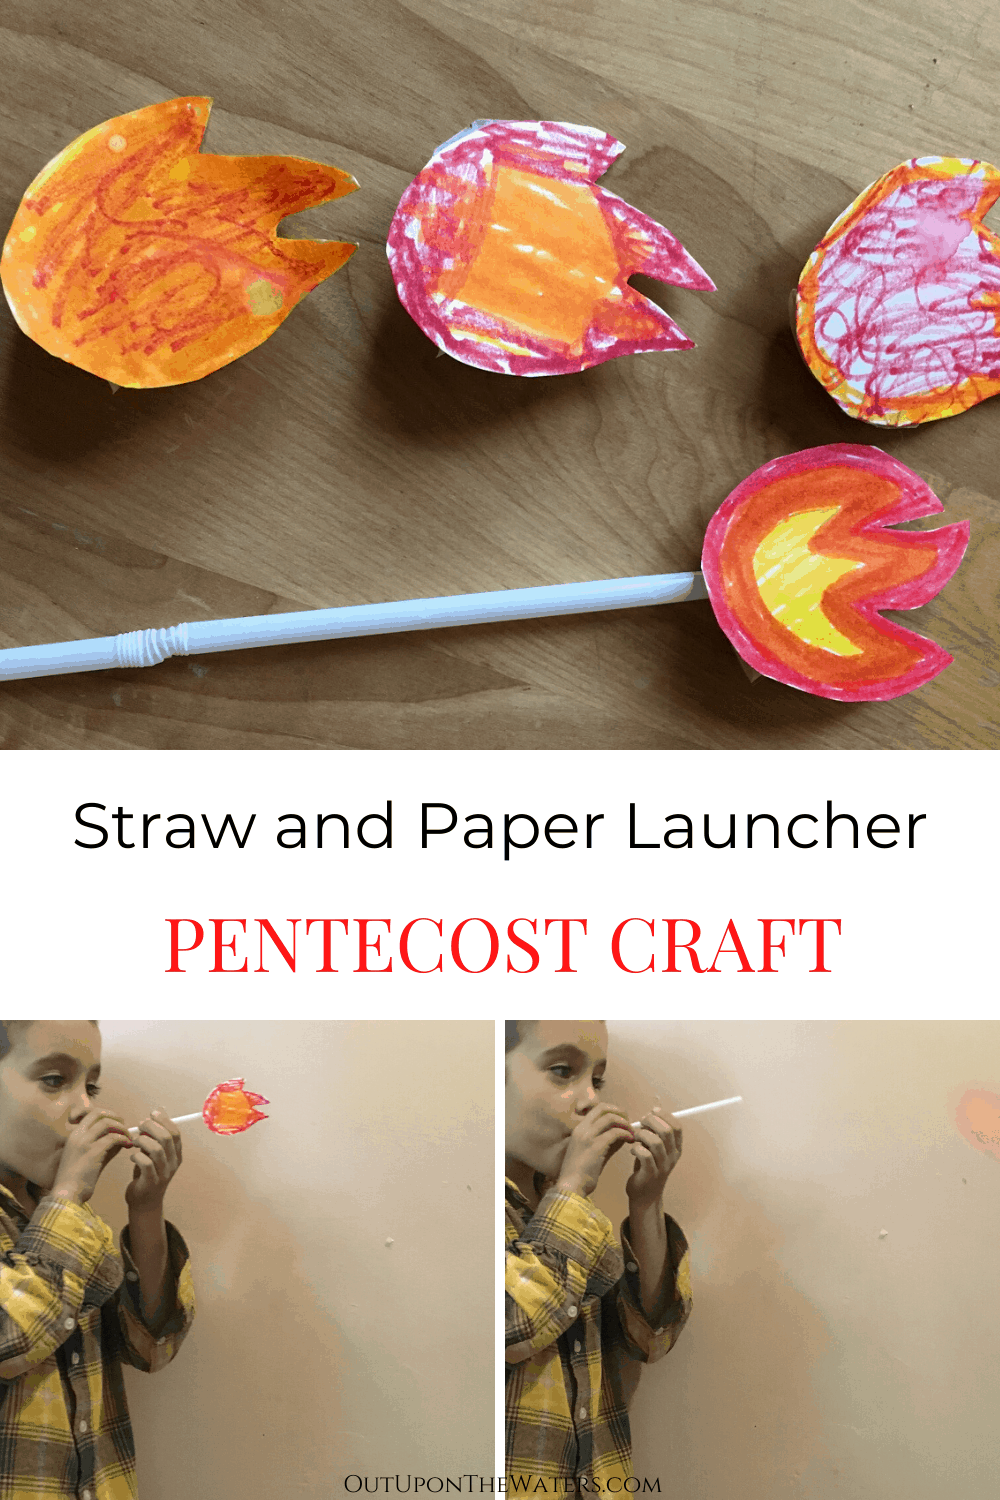 Straw and Paper Launcher Pentecost Craft for Kids